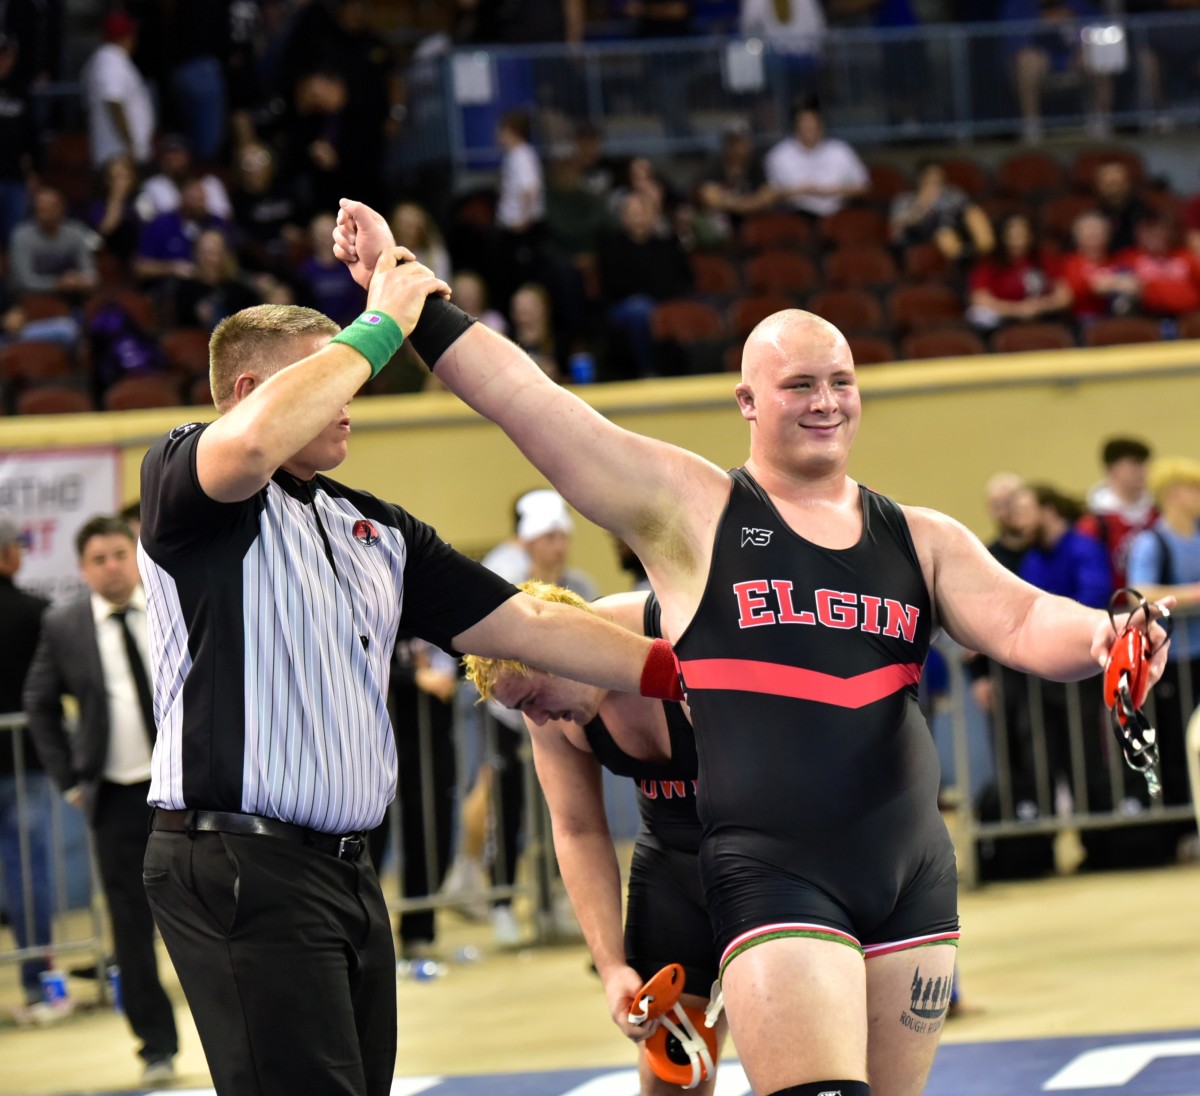 Elgin's Jace Williams gets his hand raised after winning the Class 5A 285-pound weight class title on Feb. 24, 2024. Elgin won the 5A team title, the first state championship in program history.